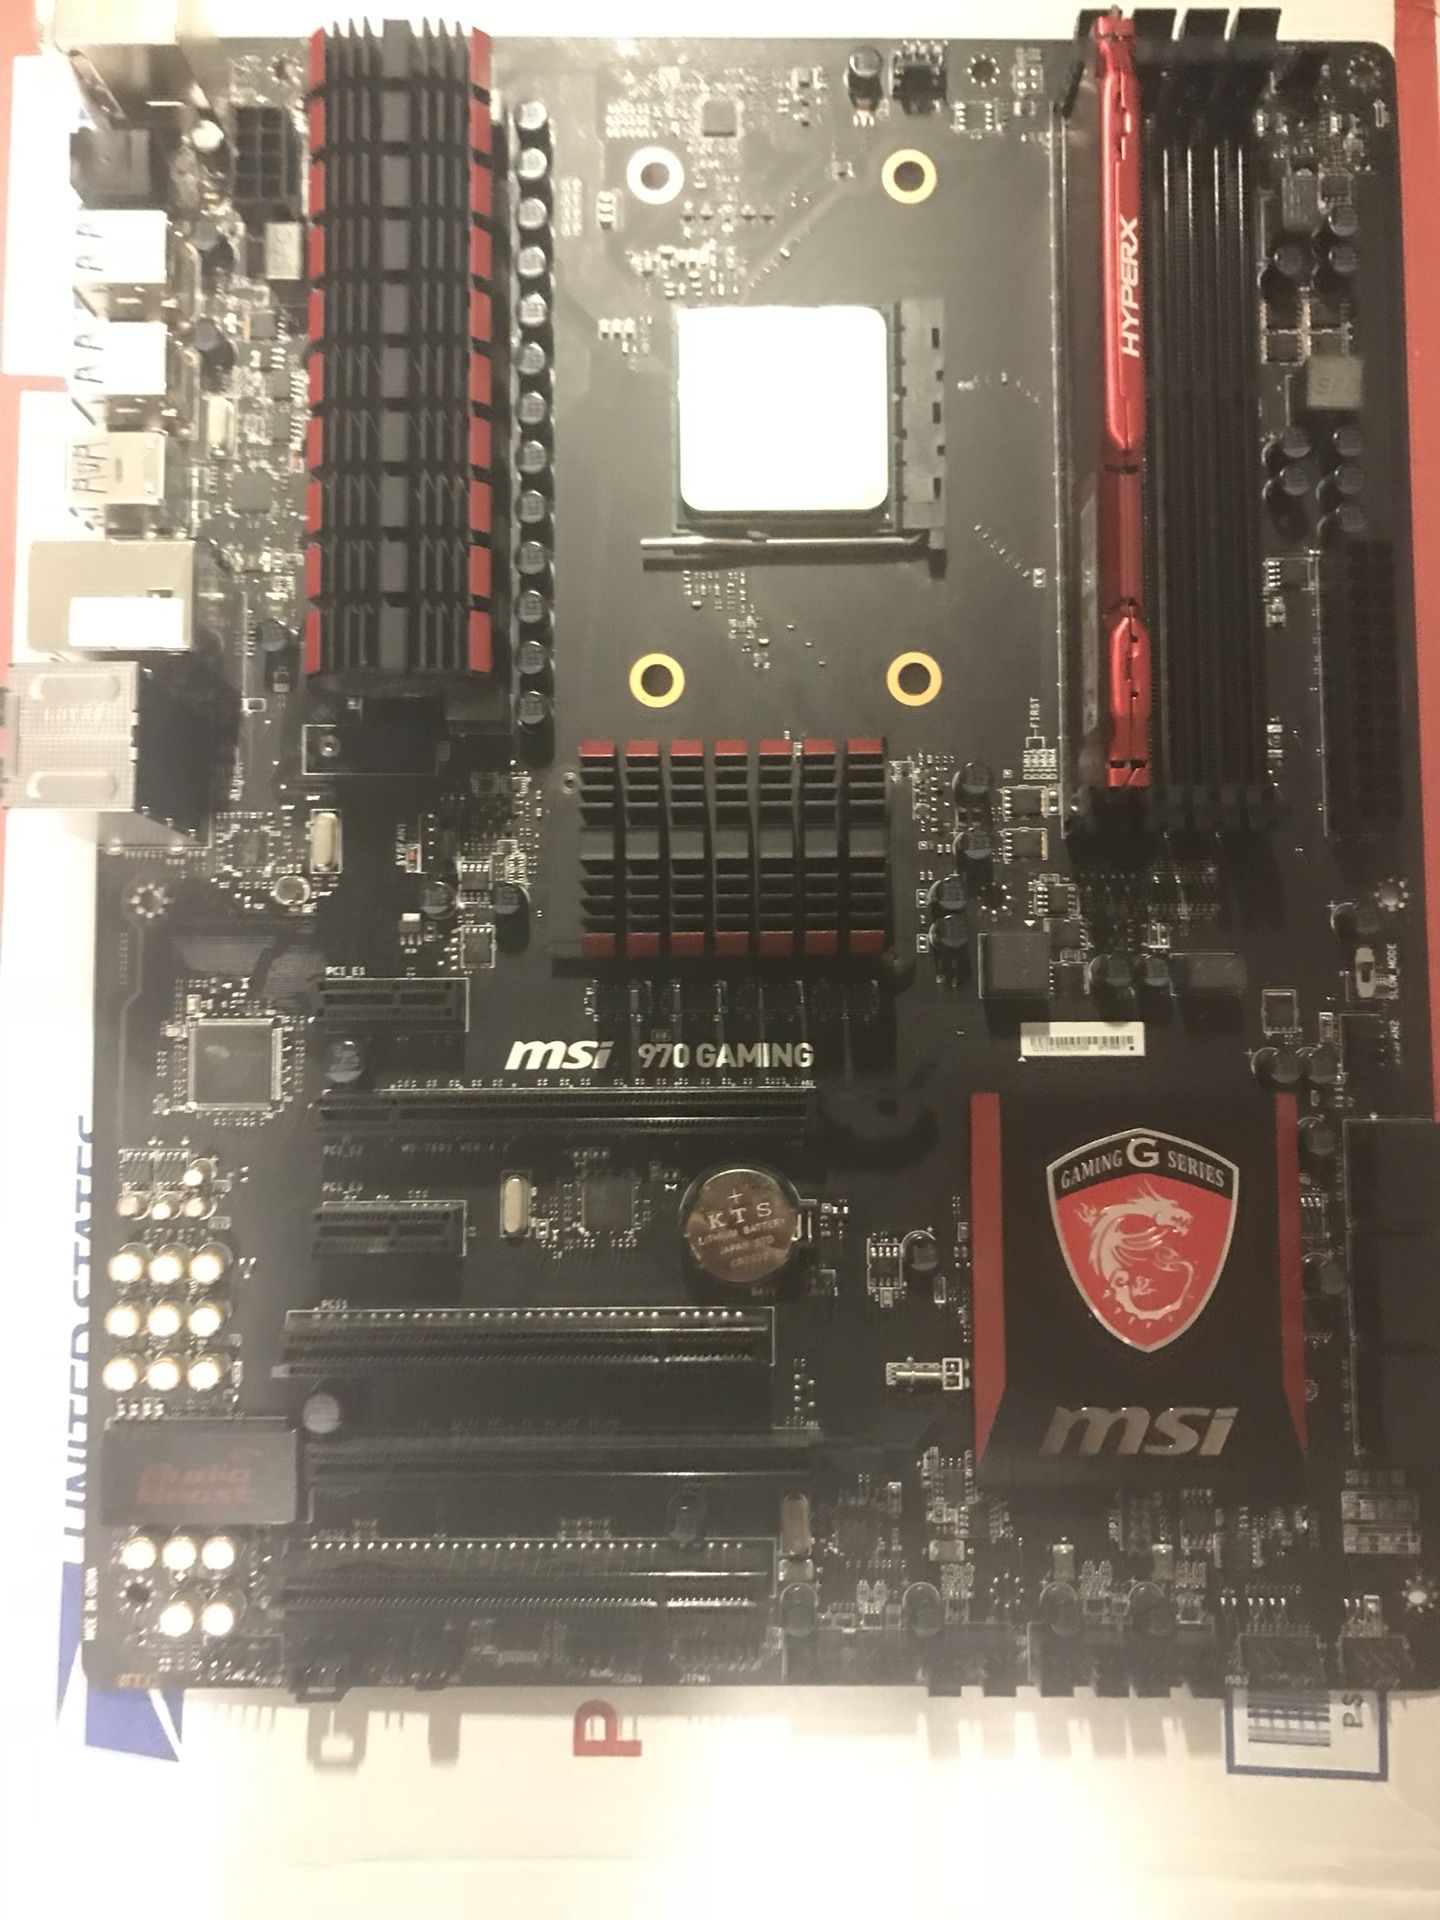 MSI 970 gaming motherboard, 8 gb of hyper x fury ram, and a 4.2 amd Fx 4350